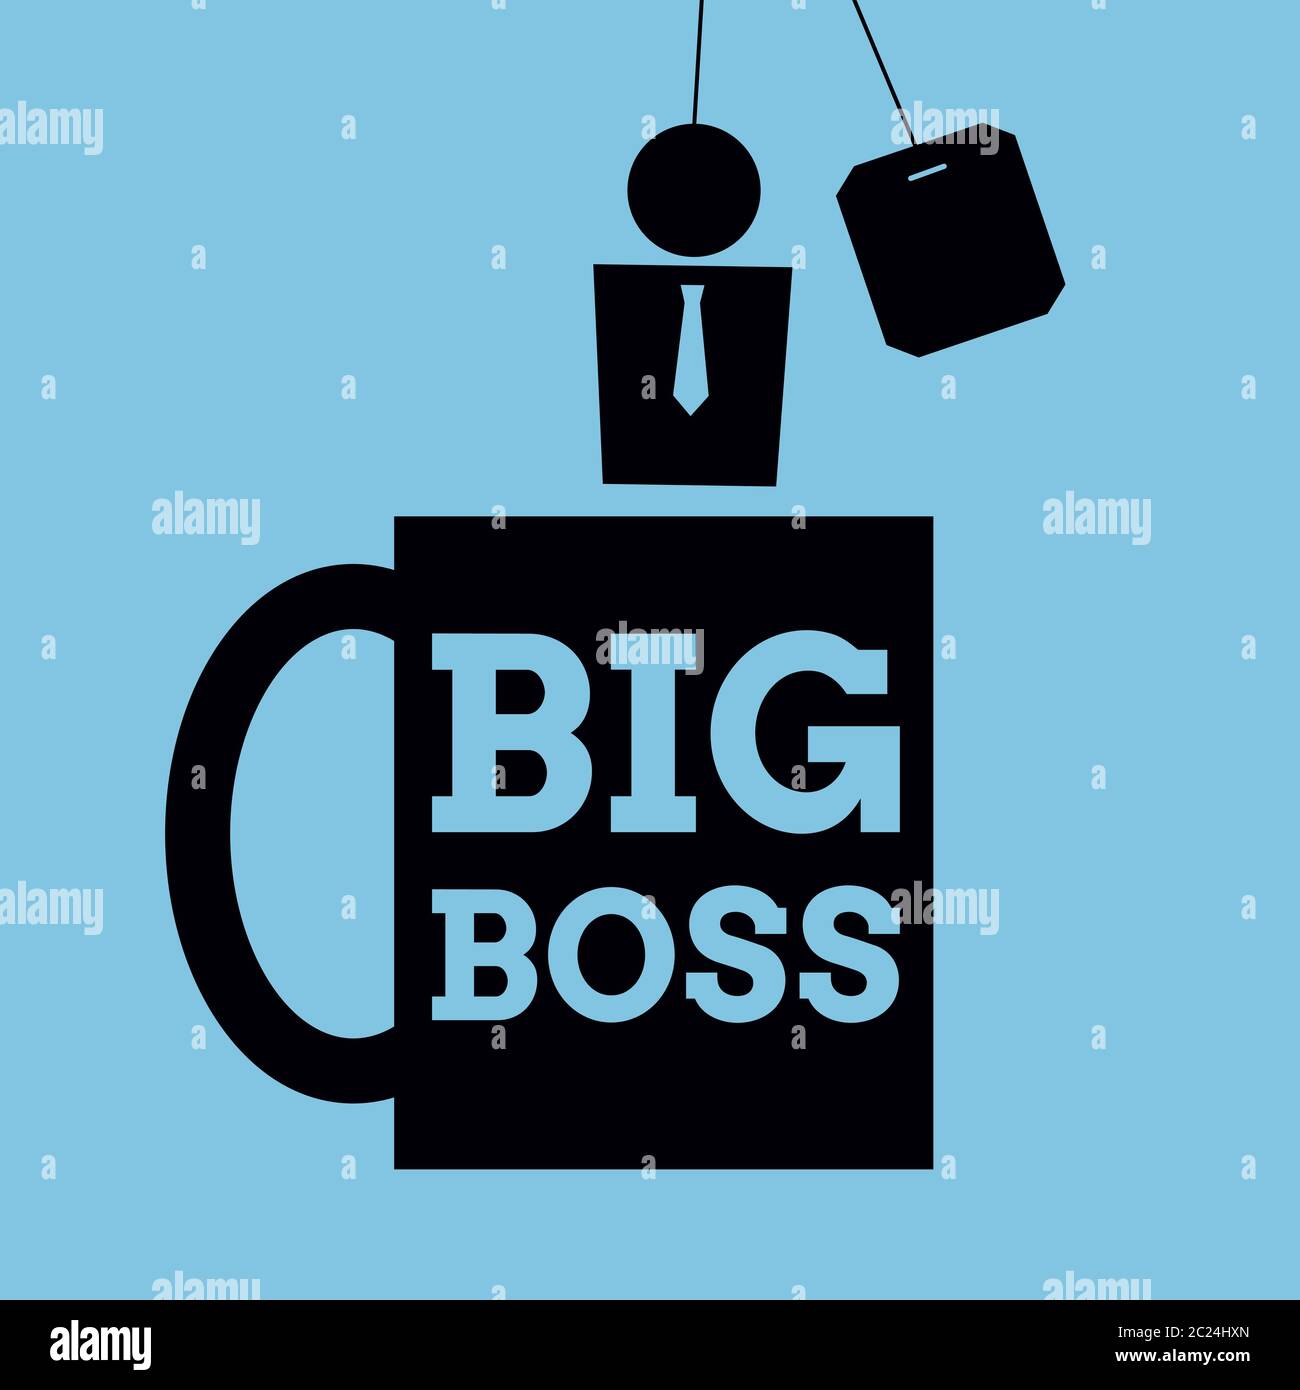 Vector simplified illustration. Icon of a mug with words 'Big Boss' written on it and a person instead of teabag. Square format. Black on blue. Stock Vector